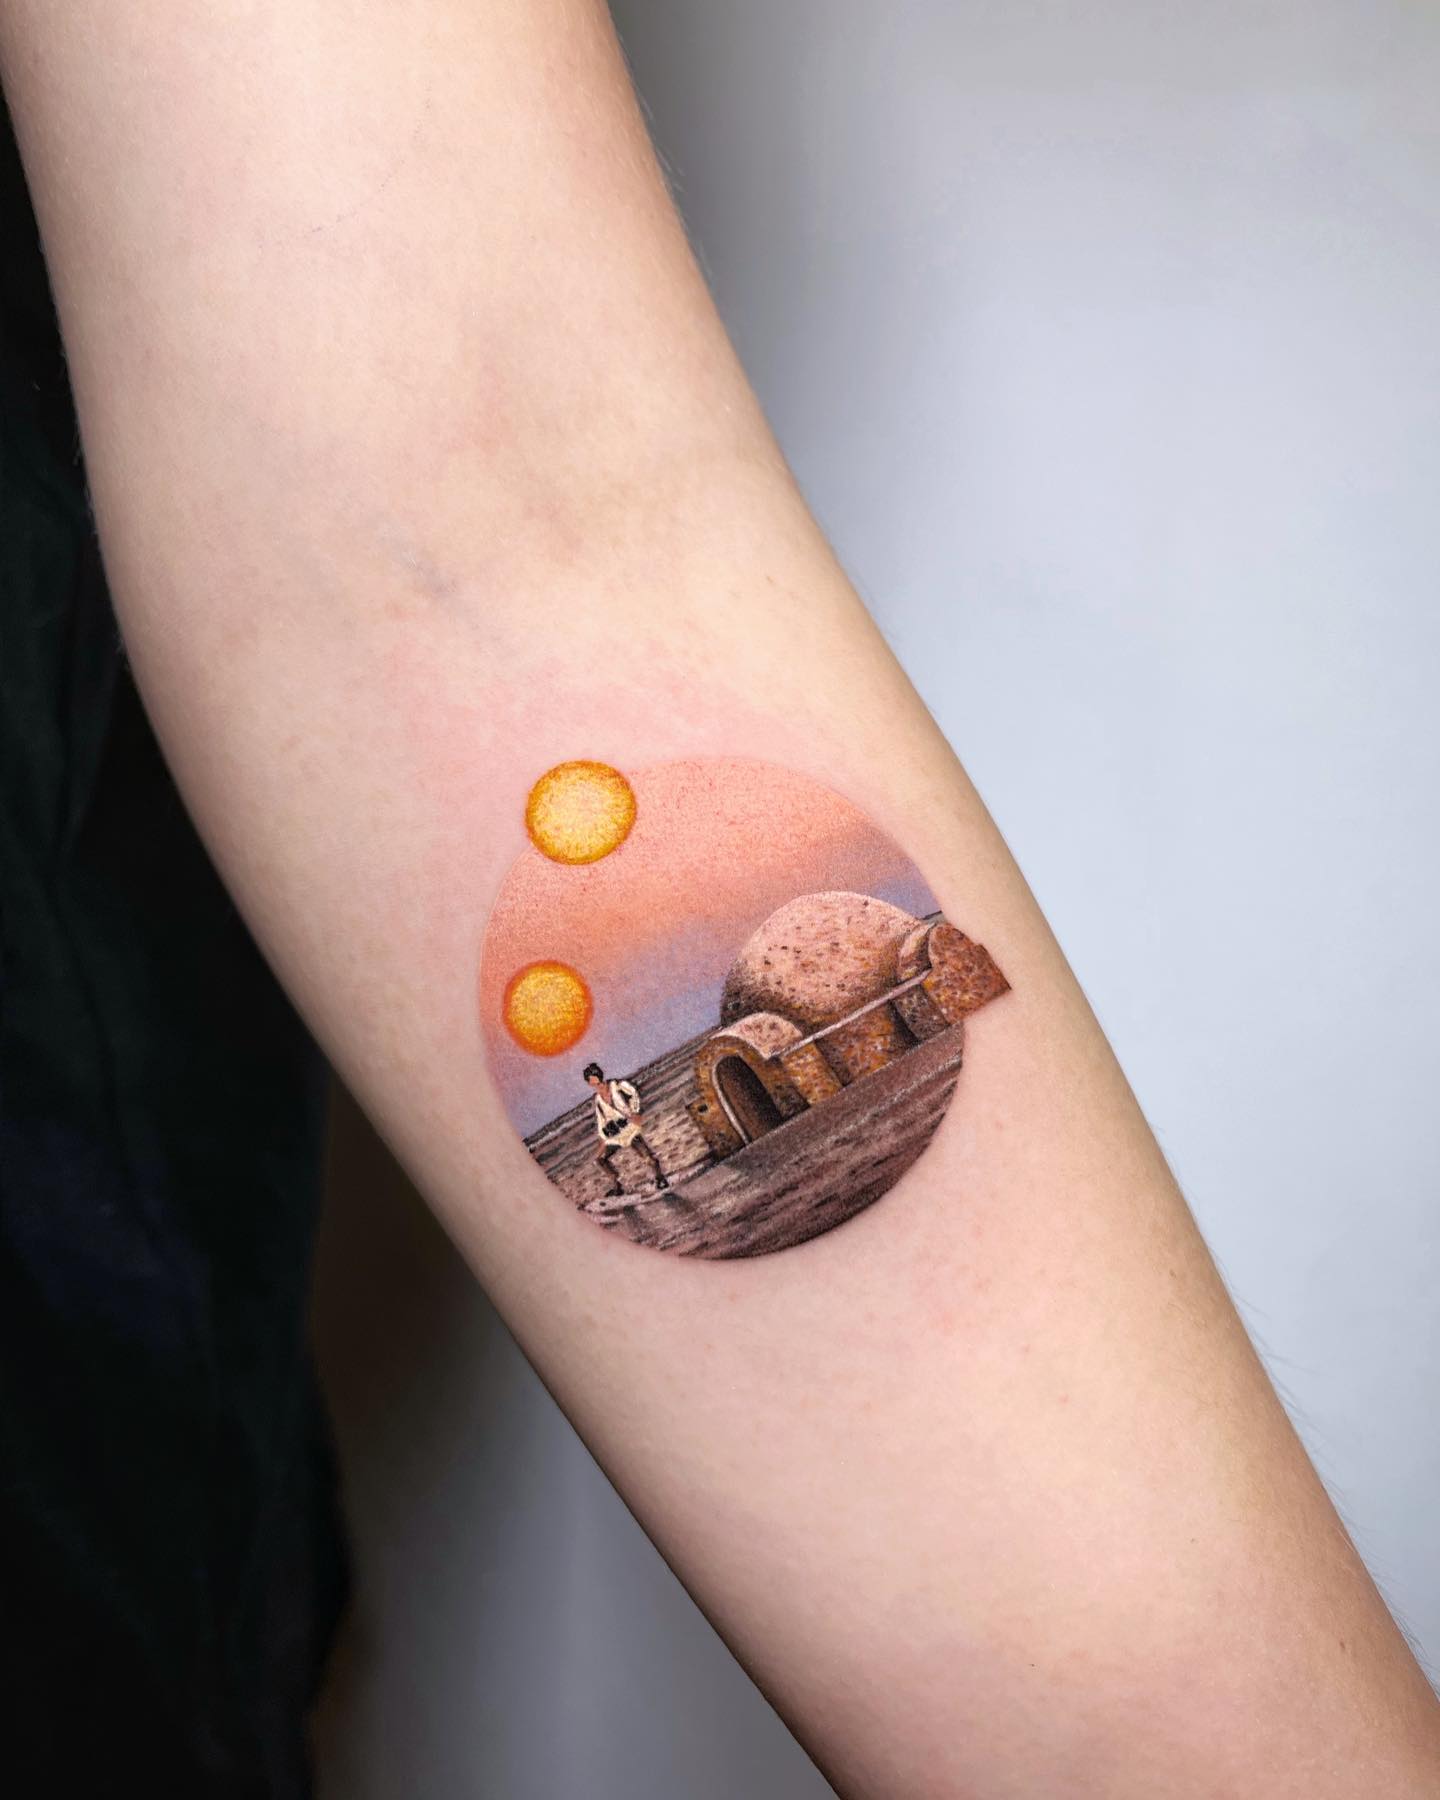 30 of The Most Eye-Catching Tattoo Designs of February - 100 Tattoos